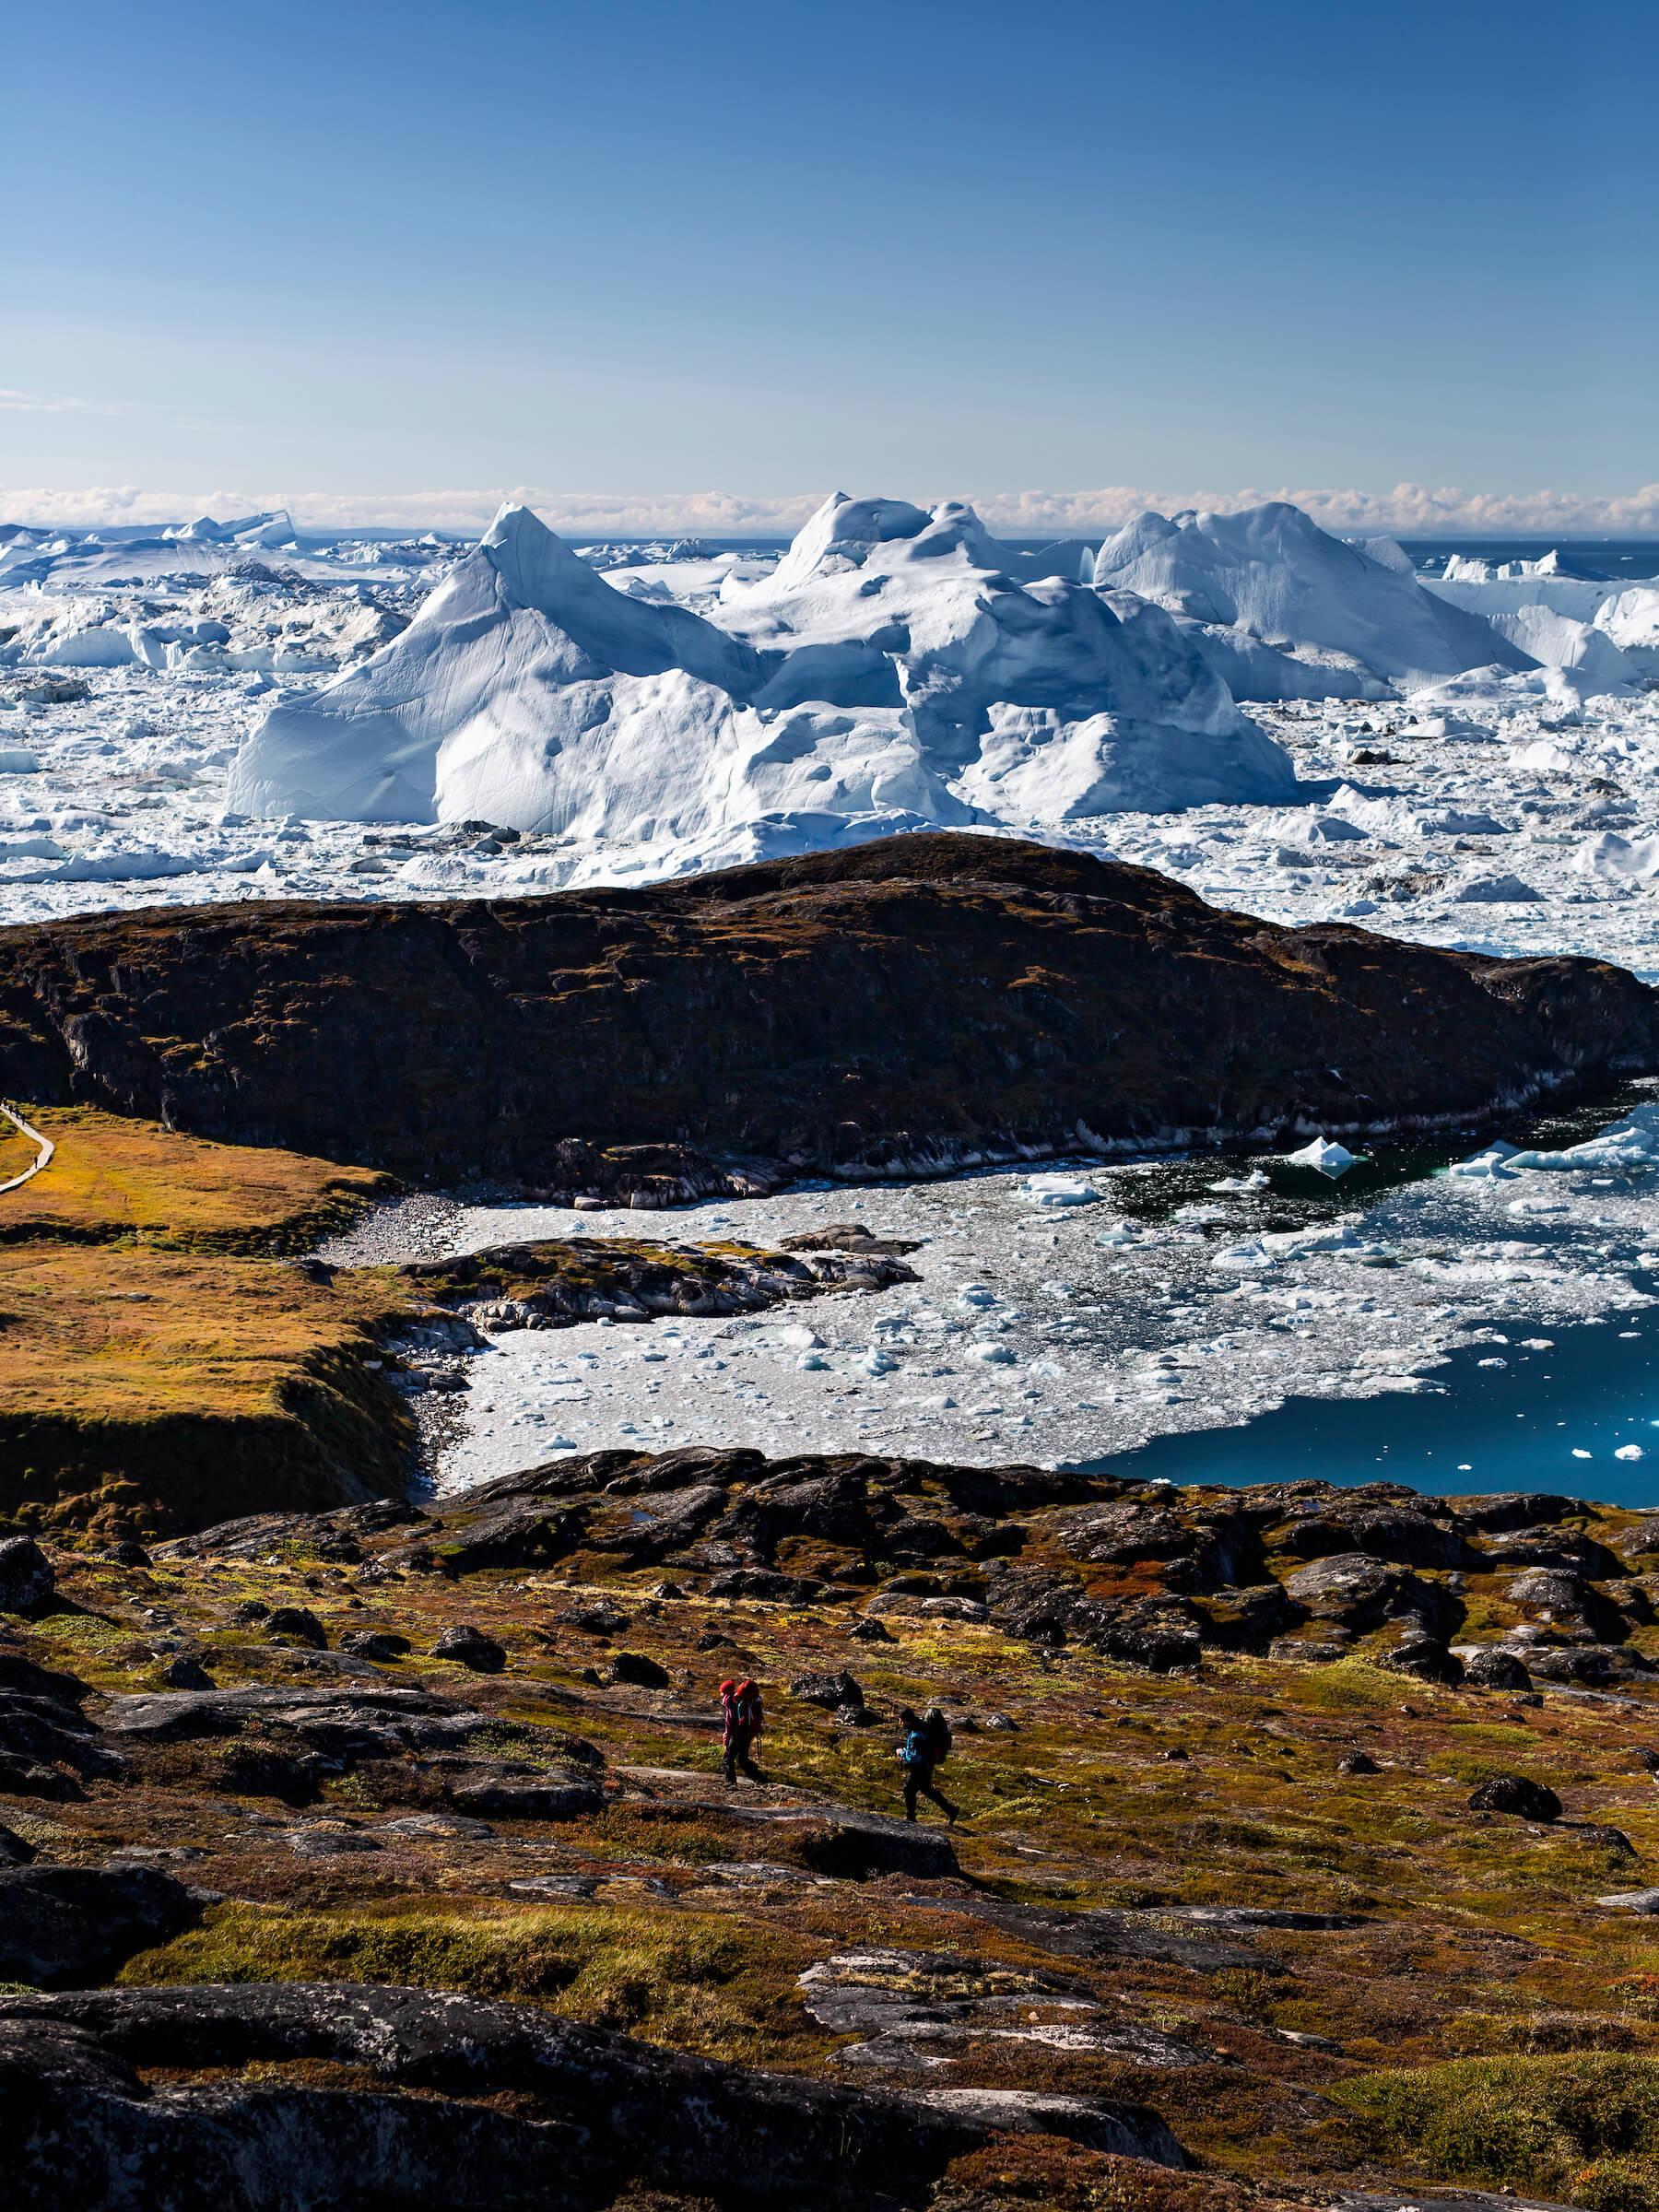 Hikers at the Ilulissat Icefjord. Photo-Aningaaq R Carlsen - Visit Greenland